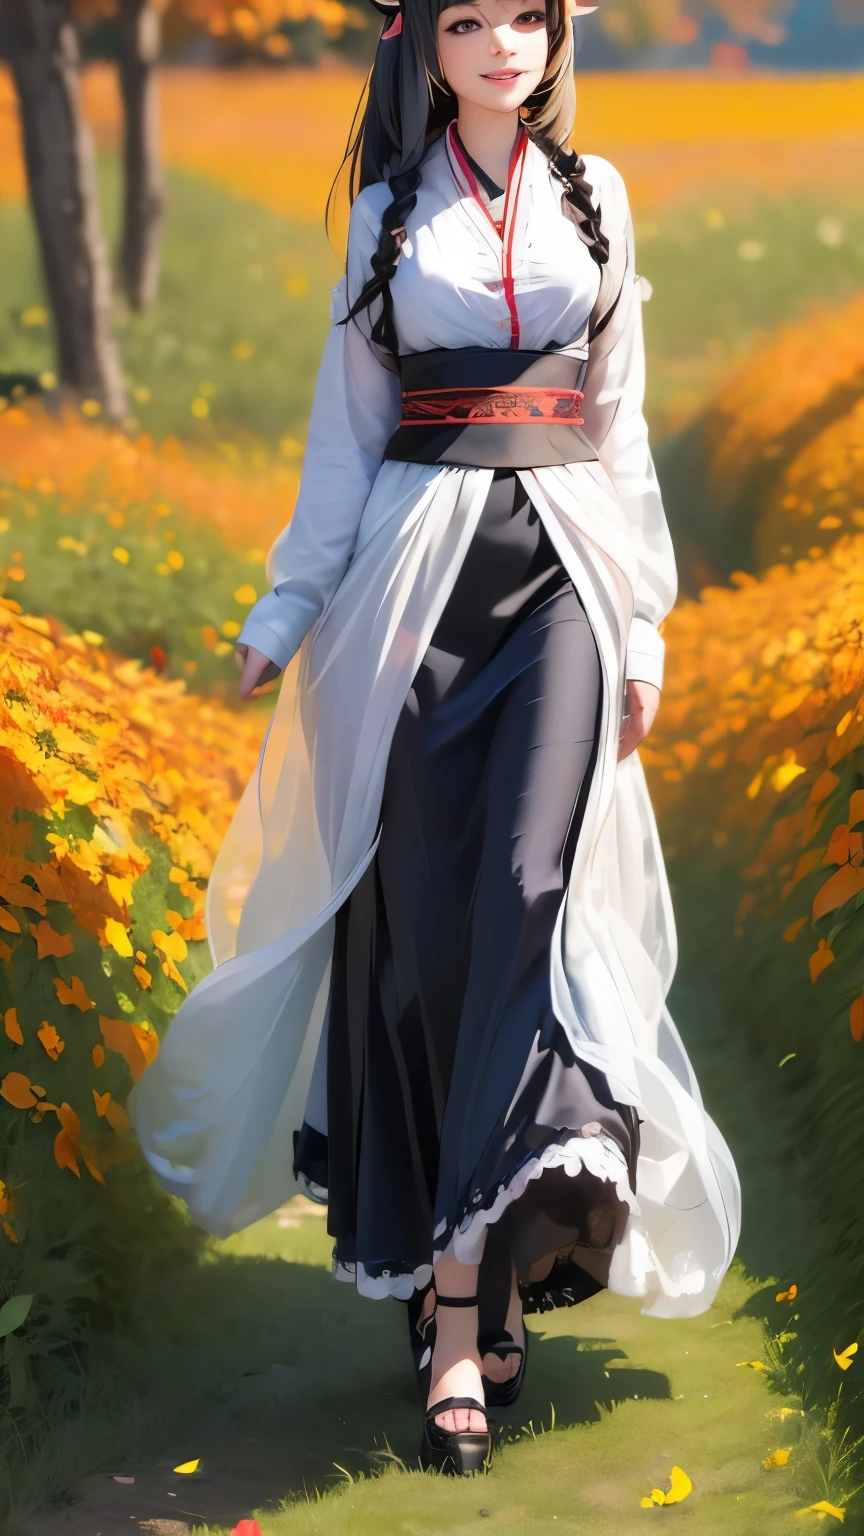 best quality, (masterpiece:1.35), wallpaper, (illustration), original, (depth of field), (1girl:1.35), (solo), full body, dynamic, detailed face,mature female, adult, (old:1.3), Medium breasts, Amused, happy,miko clothing, flower trim,absurdly long hair, black hair,dog ears volumetric lighting, fall leaves, Tyndall effect,